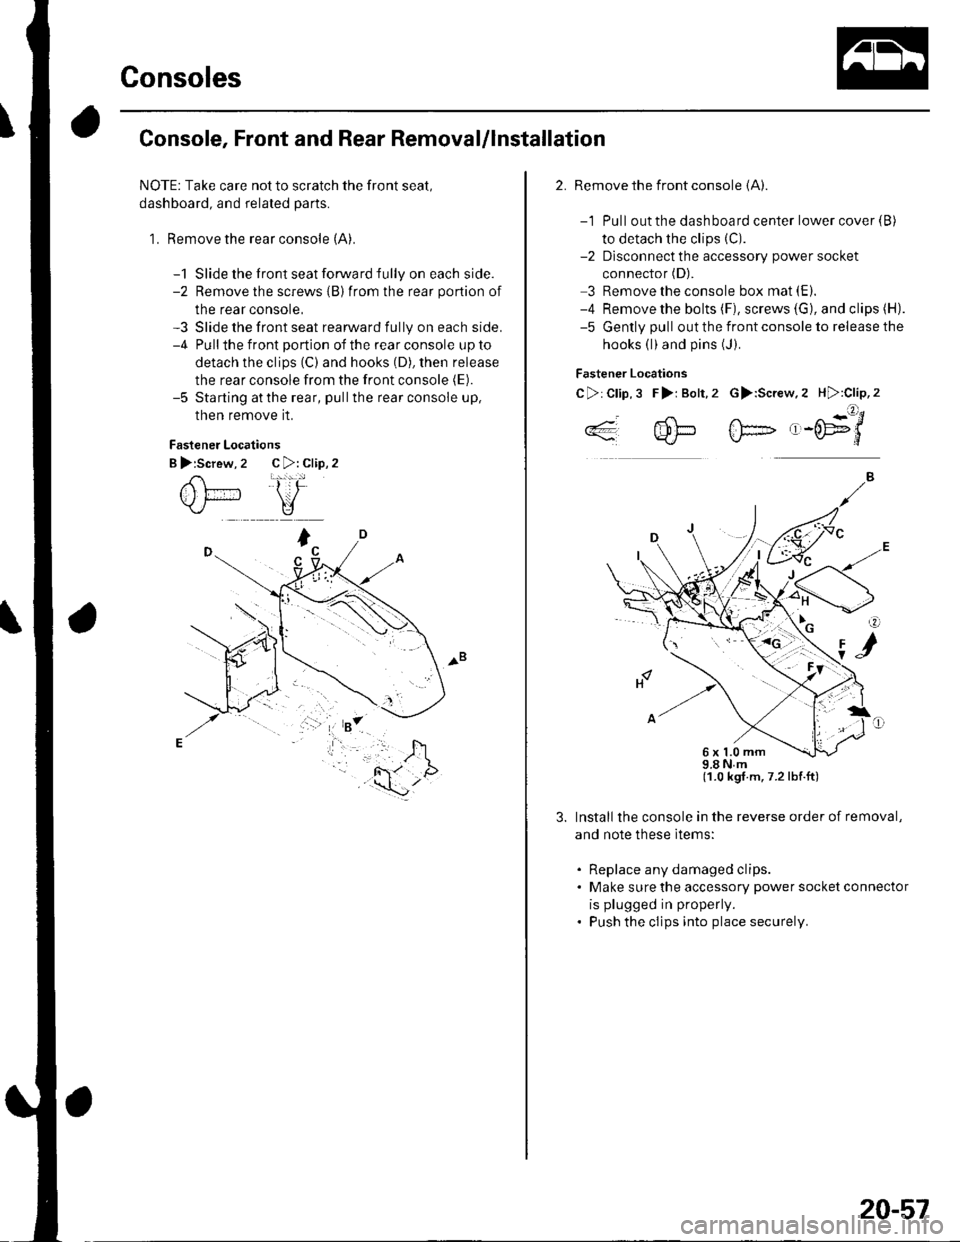 HONDA CIVIC 2003 7.G Workshop Manual Consoles
Console, Front and Rear Removal/lnstallation
NOTE: Take care not to scratch the front seal,
dashboard, and related parts.
1. Remove the rear console (A).
-1 Slide the front seat forward fully